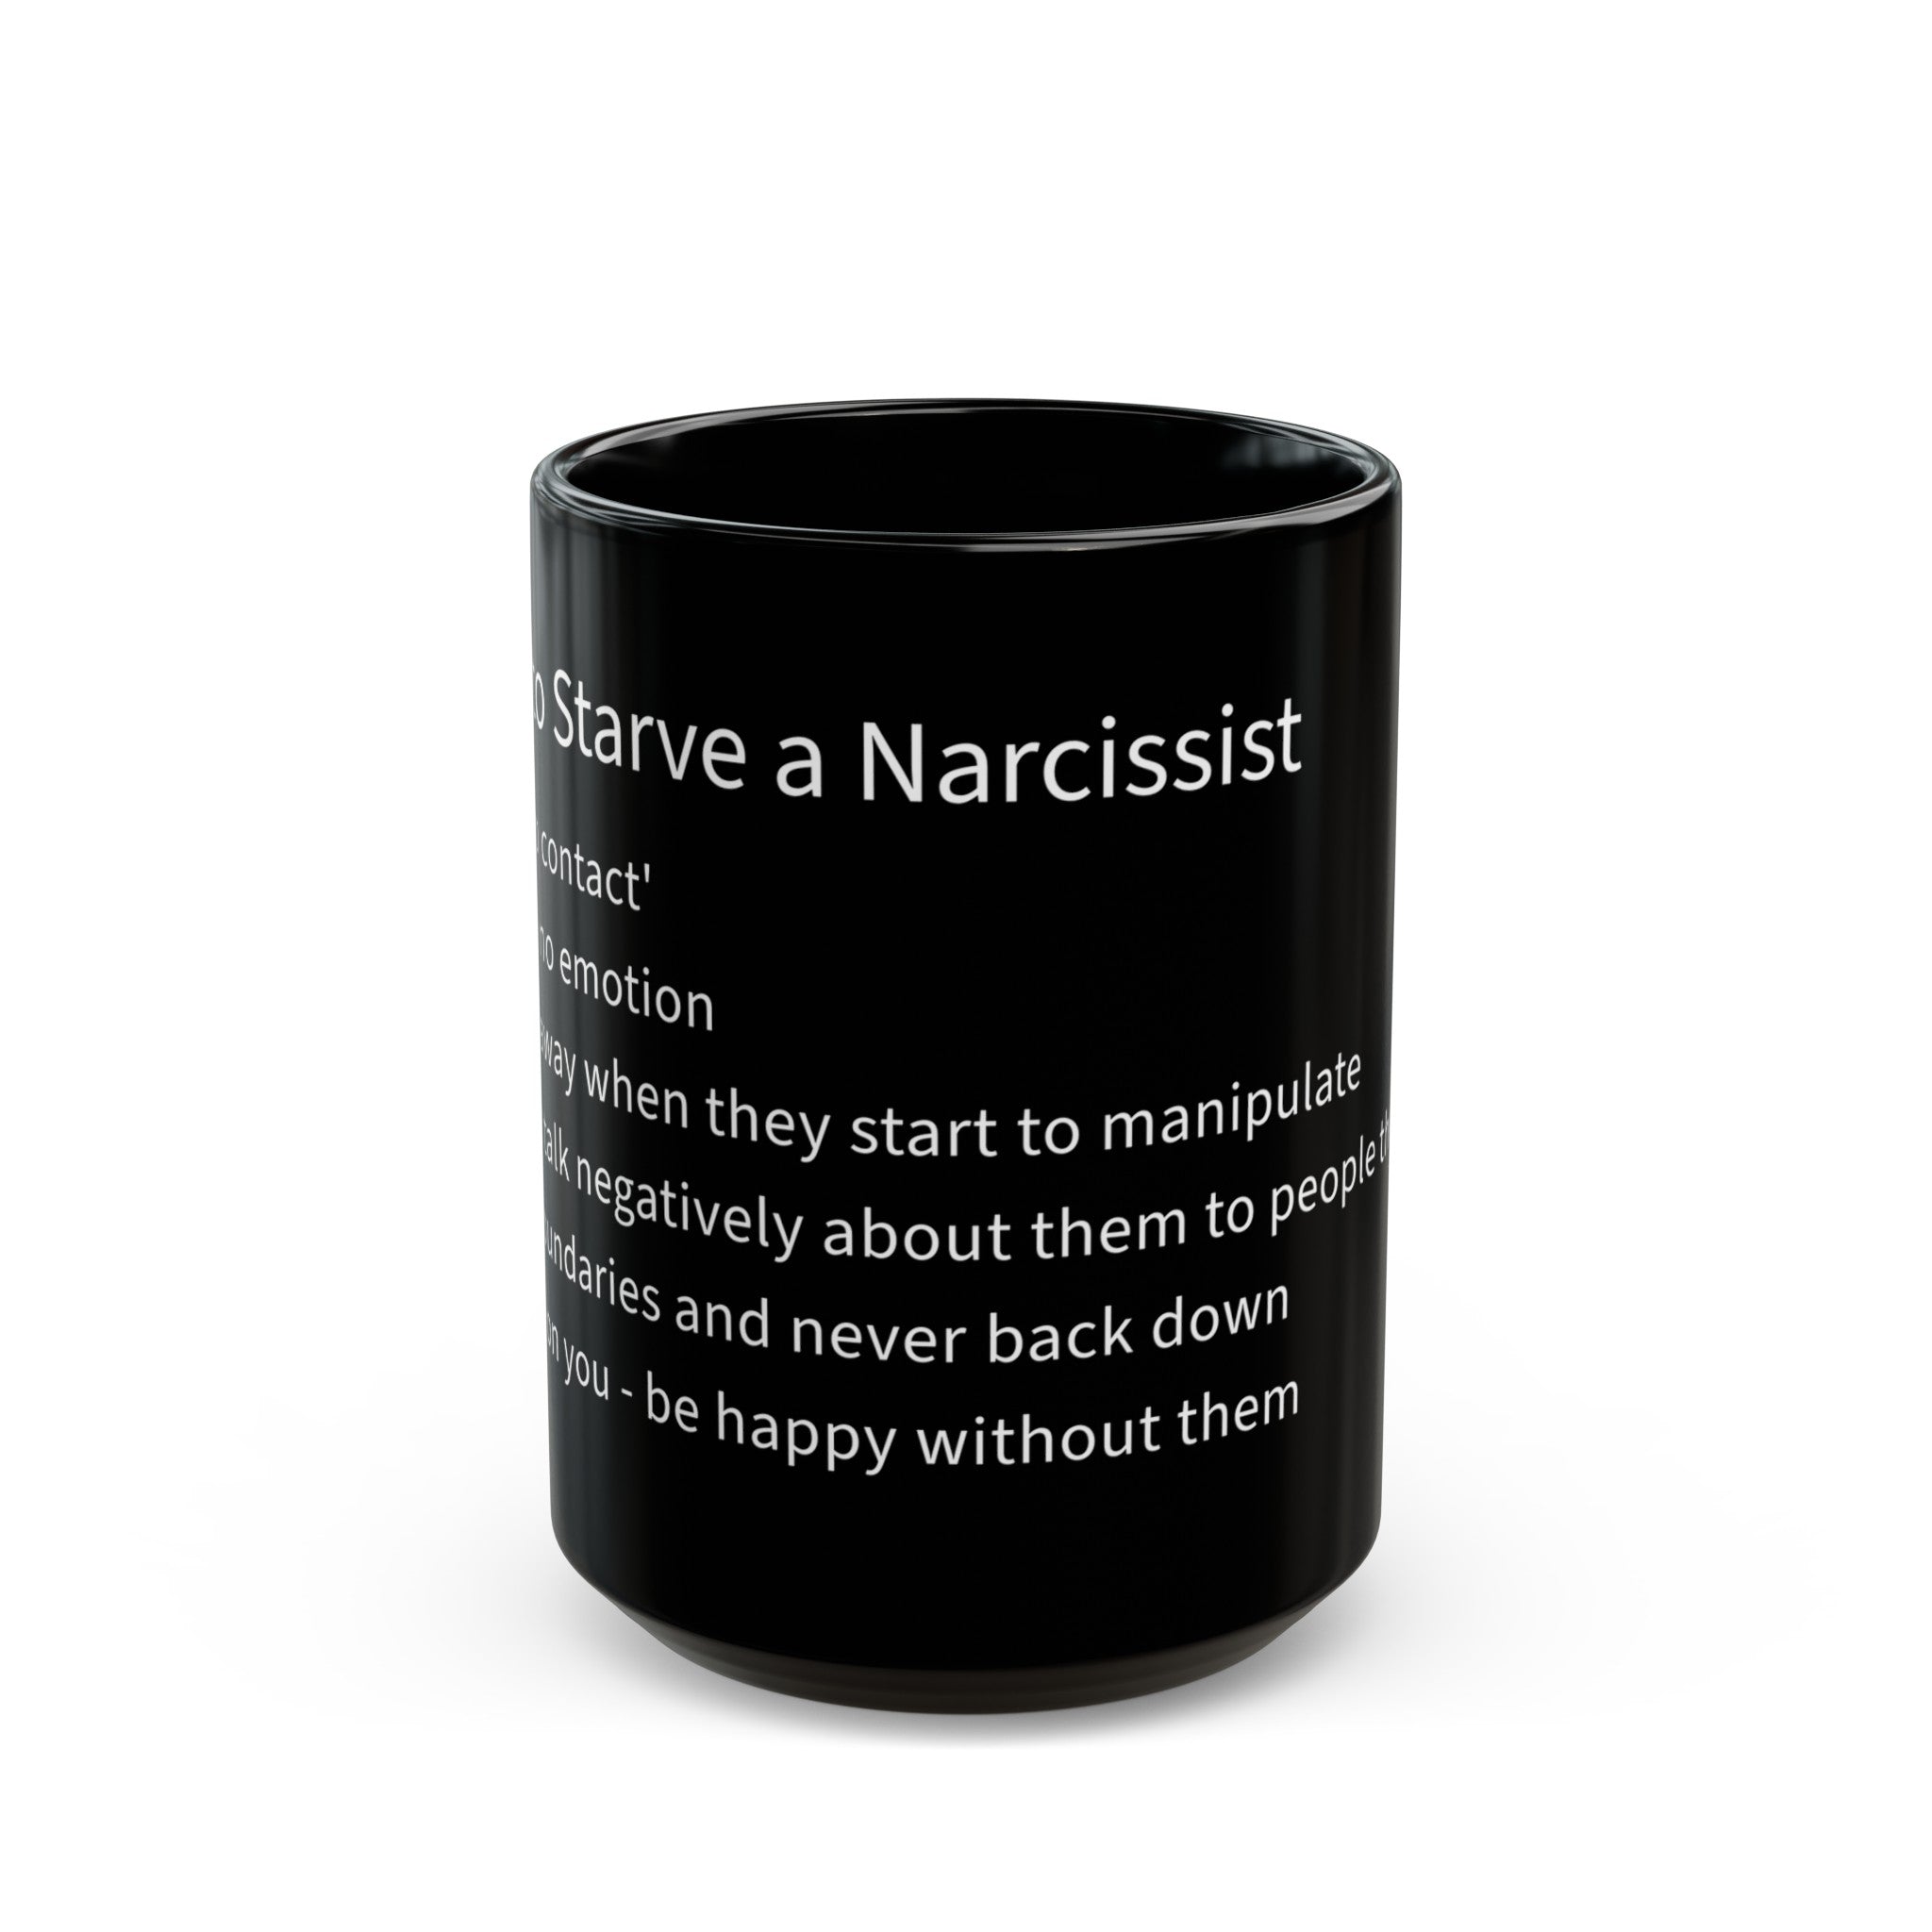 How to Starve a Narcissist (15oz)